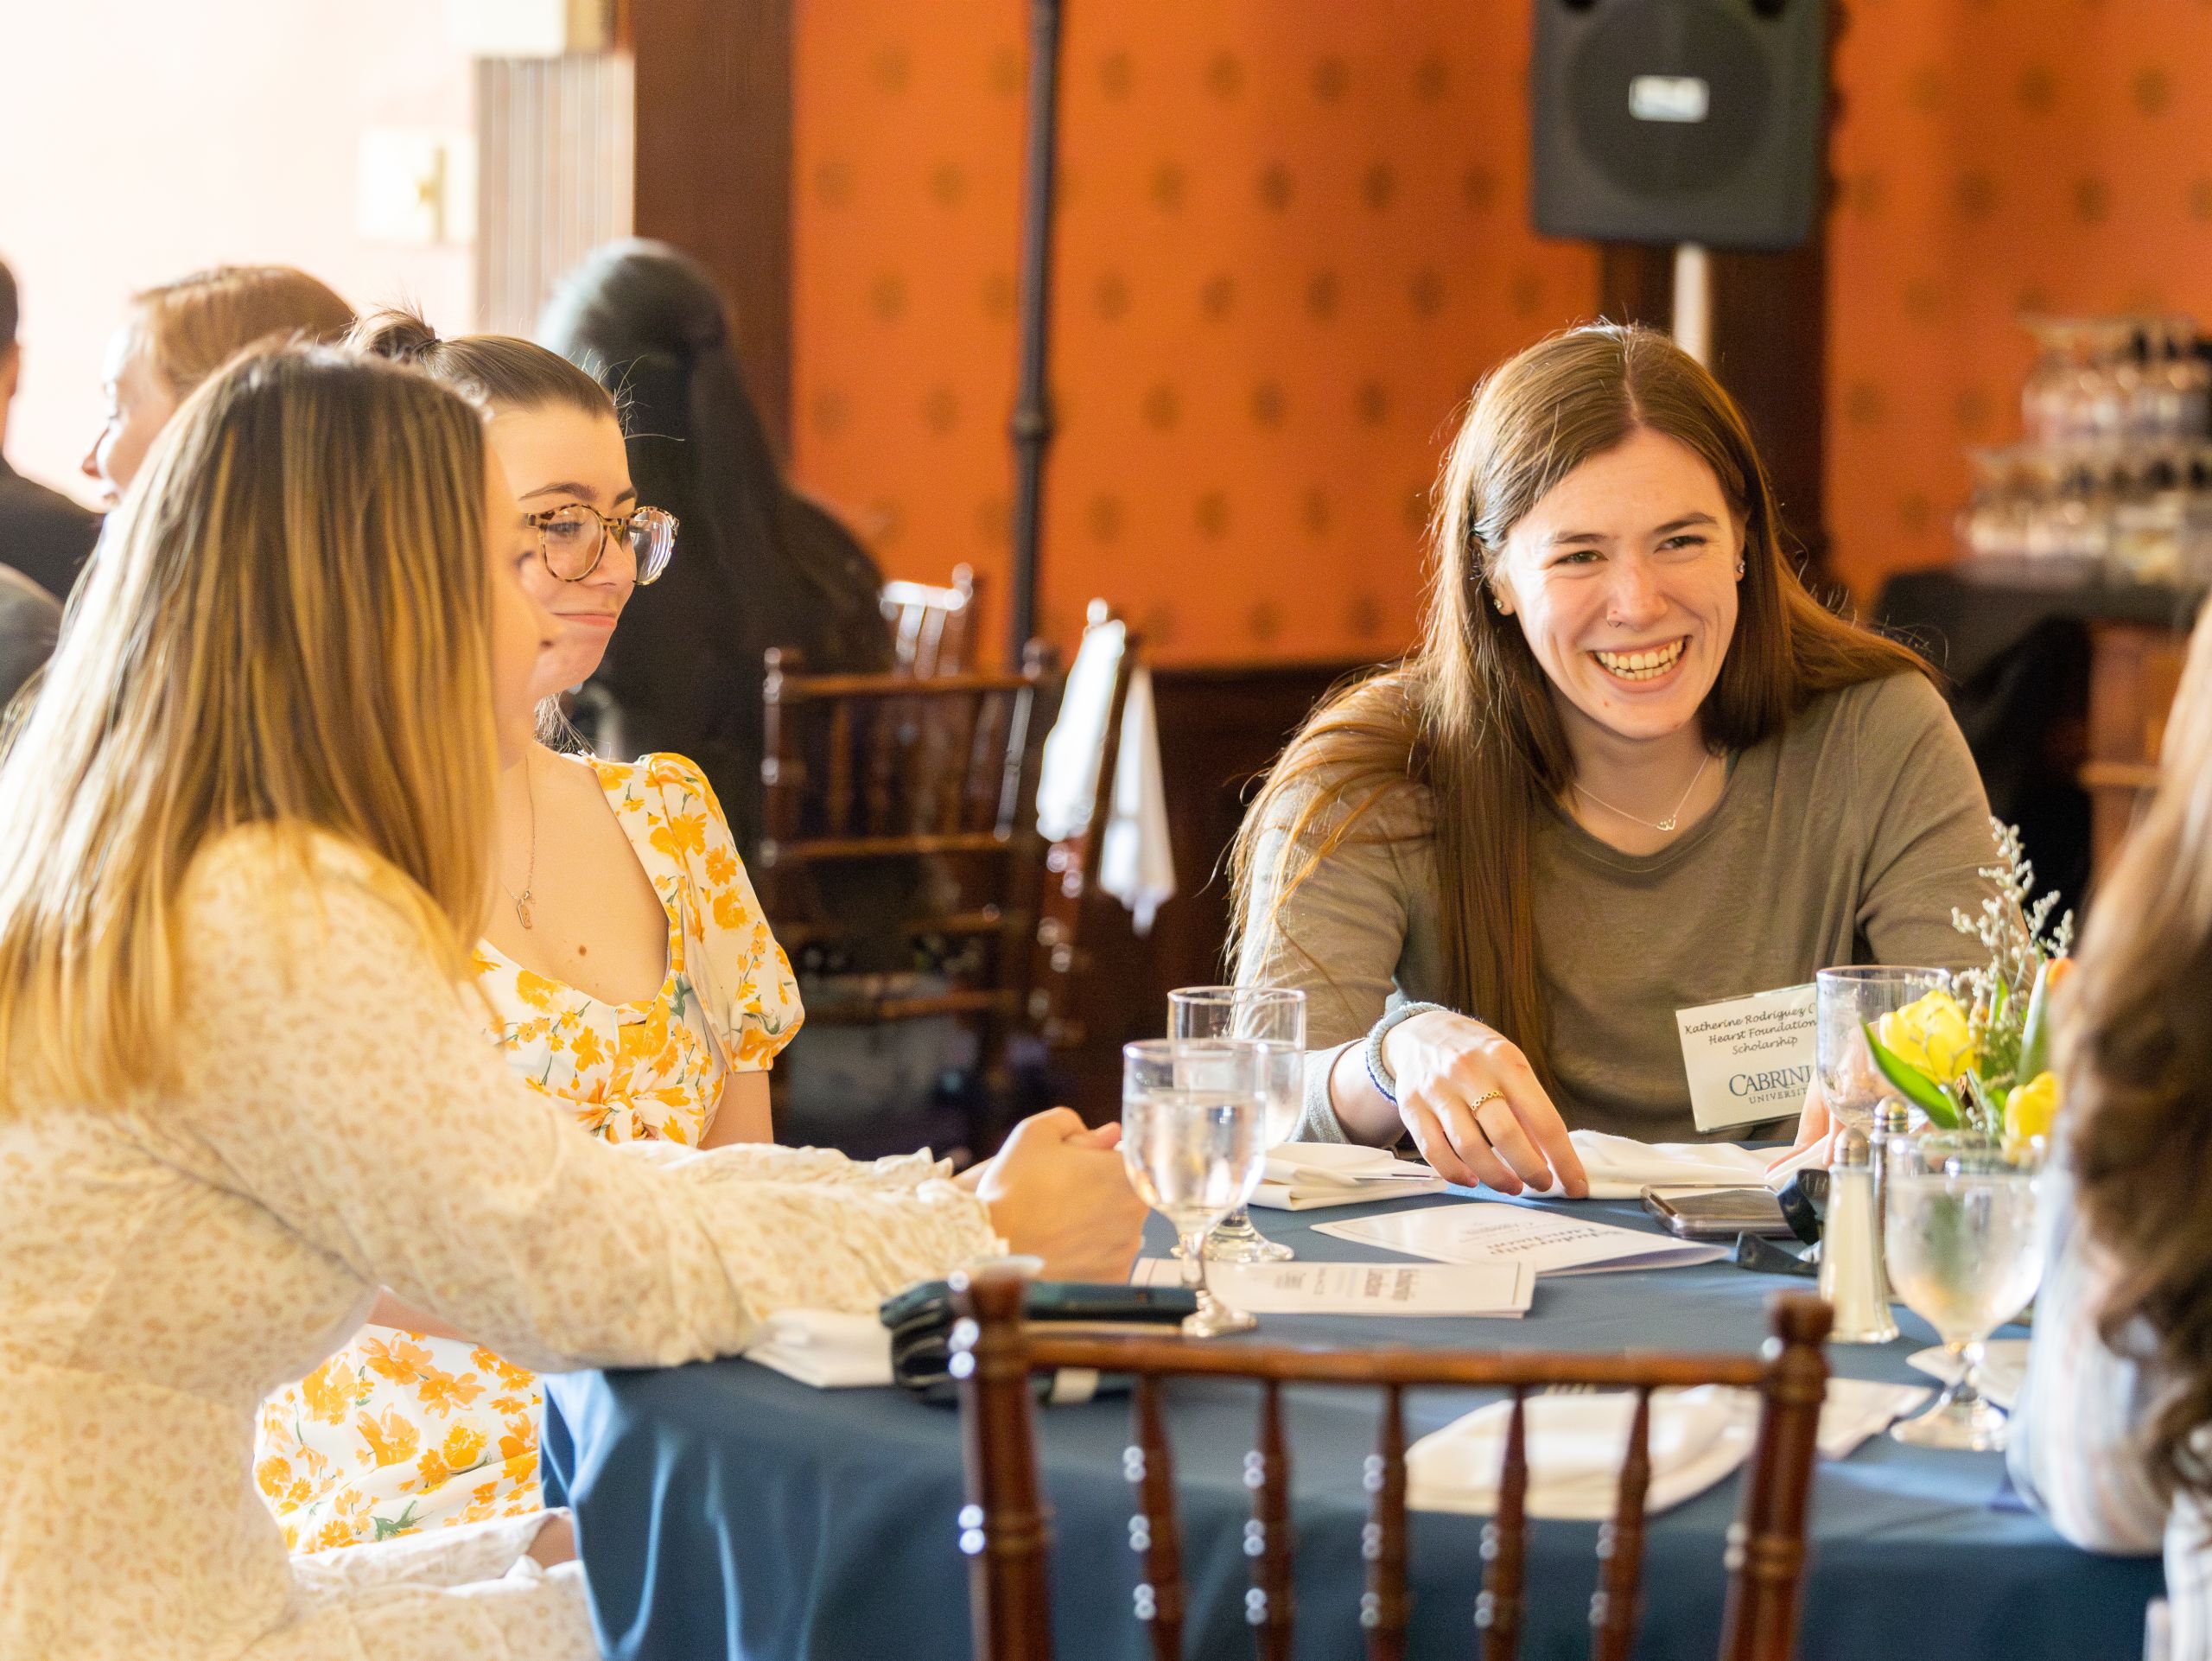 Students celebrate their academic success at the scholarship luncheon in spring 2023. Photo via Cabrini University Flickr